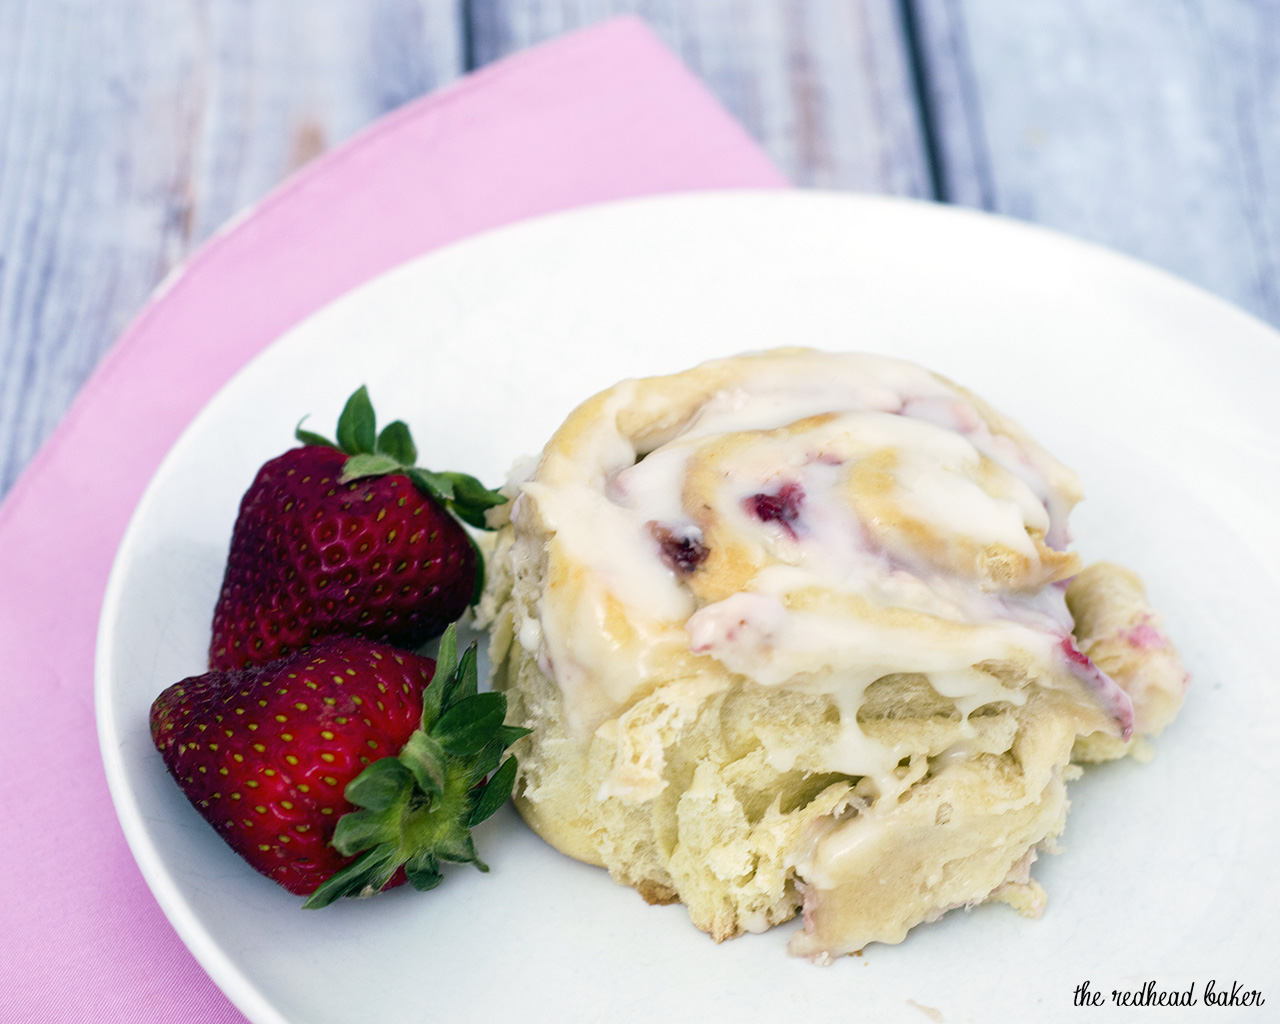 With summer on the way, give your sweet rolls a seasonal twist: fill them with fresh strawberries and sweetened cream cheese, then top with a sweet-tart lemon-flavored simple icing. #BrunchWeek TheRedheadBaker.com